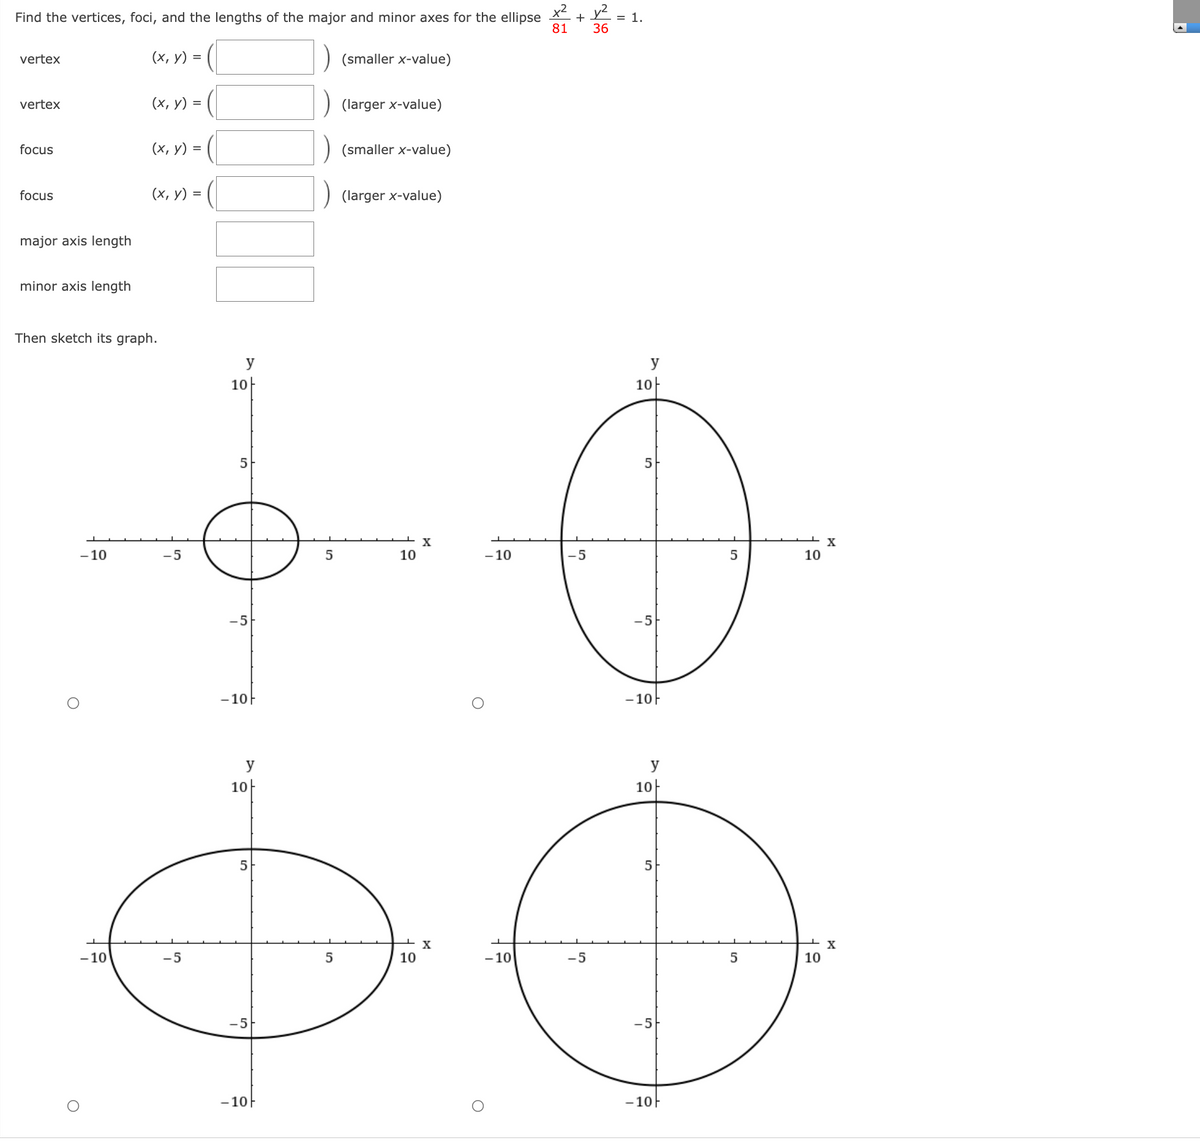 Find the vertices, foci, and the lengths of the major and minor axes for the ellipse X + Y
36
= 1.
81
vertex
(х, у) %3D
(smaller x-value)
vertex
(х, у) %3D
(larger x-value)
focus
(х, у) %3D
(smaller x-value)
focus
(х, у) 3D
(larger x-value)
major axis length
minor axis length
Then sketch its graph.
y
y
10-
10-
X
- 10
-5
5
10
- 10
-5
10
-5
-5
- 10F
- 10F
y
y
10-
10-
5
X
- 10
-5
10
- 10
-5
10
-5
-5
- 10F
- 10
